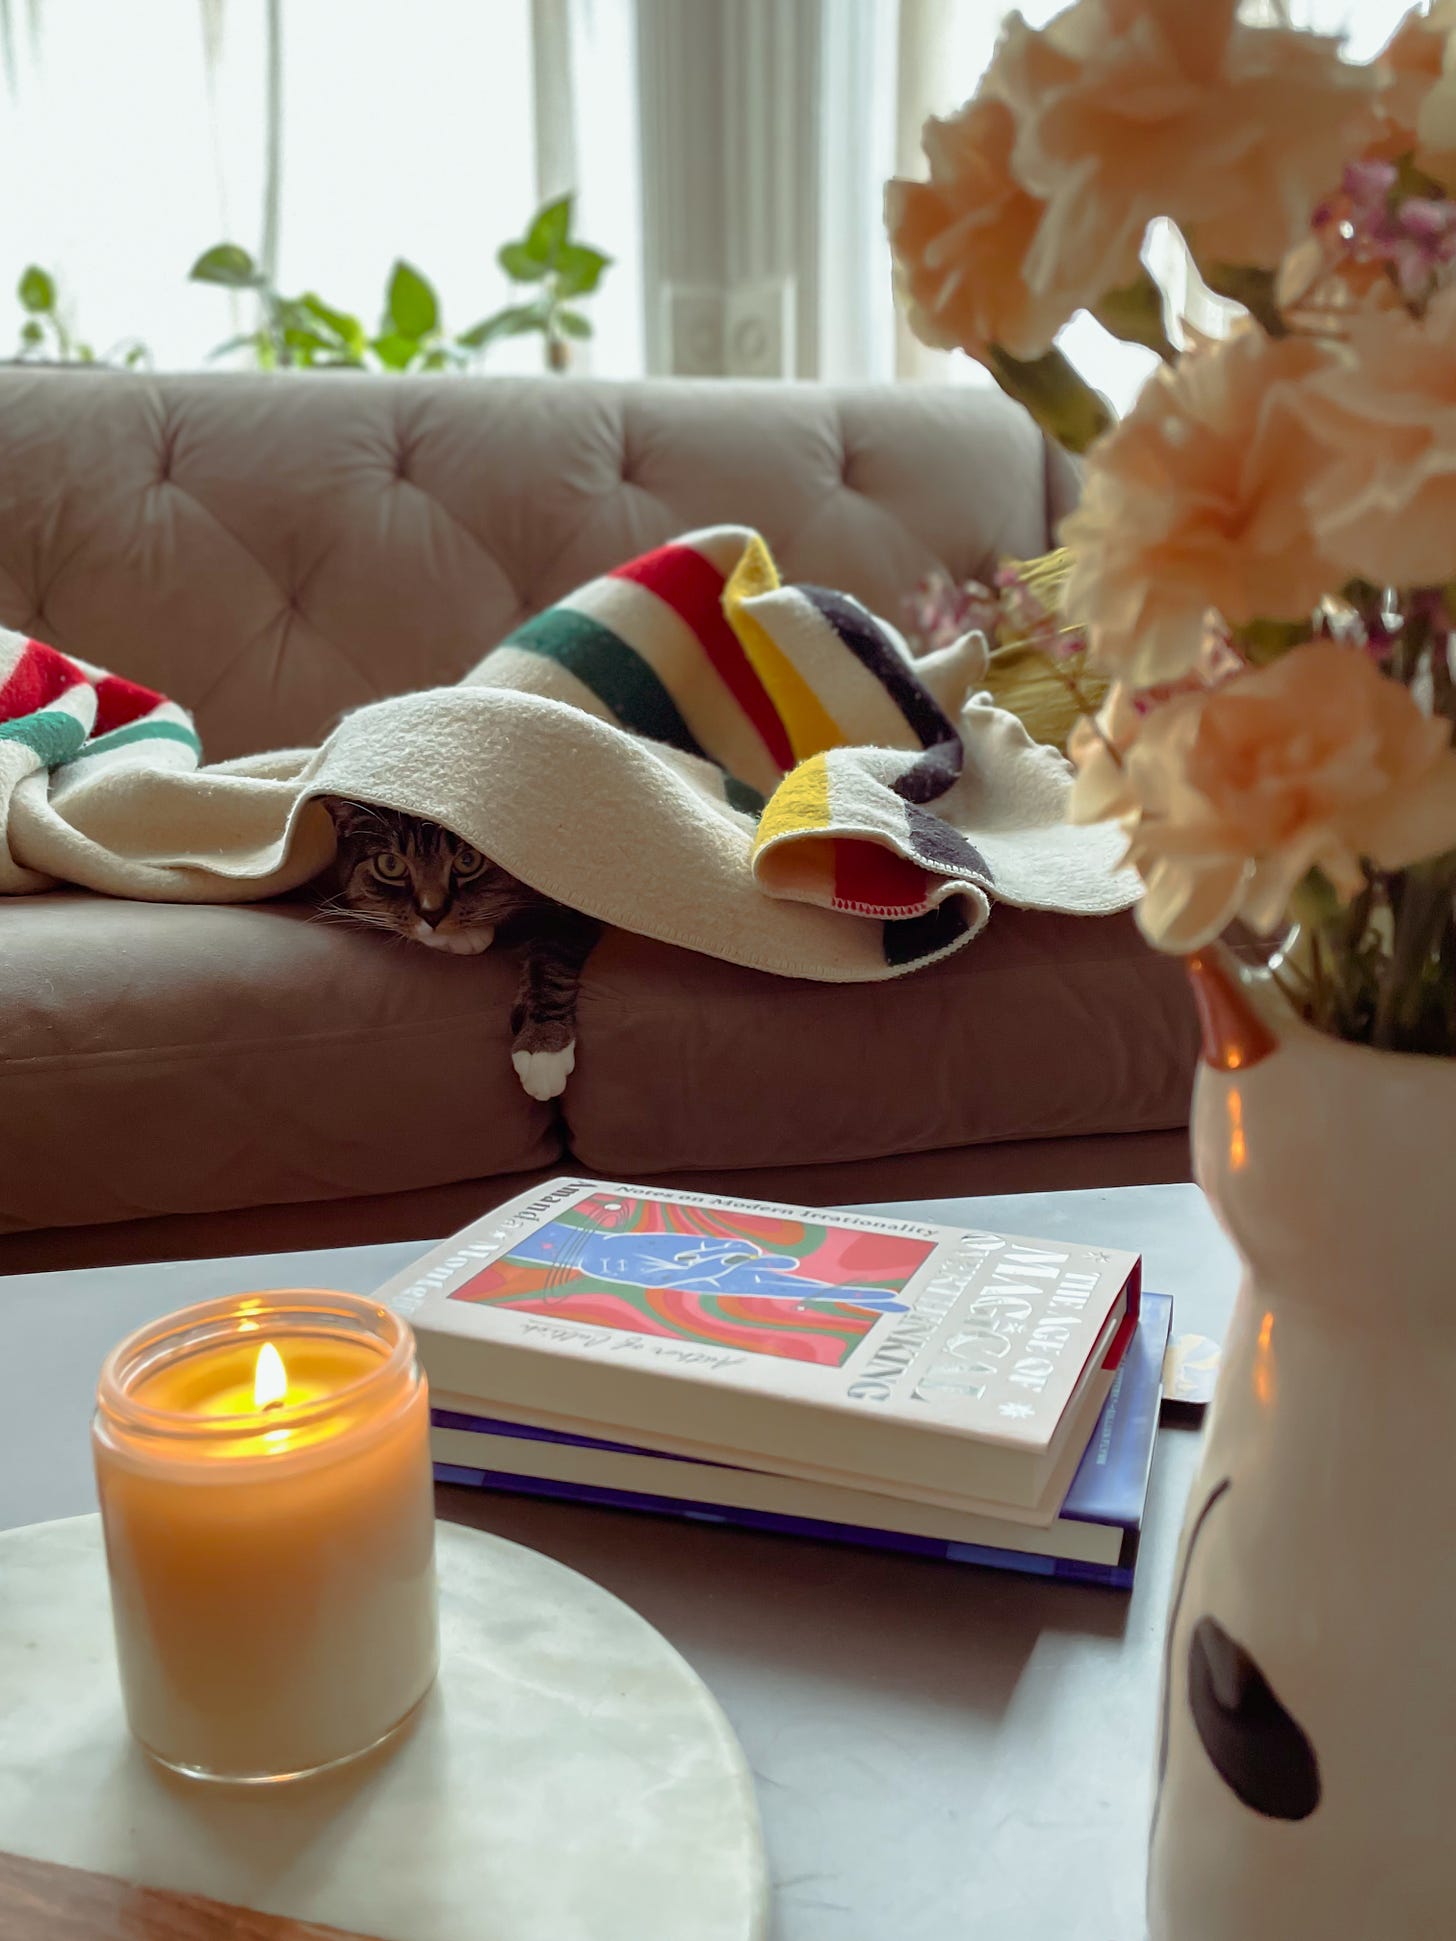 Harry, a grey and white cat, peeks out from under a white blanket on a grey couch. In the foreground is a coffee table topped with books, flowers and a lit candle.